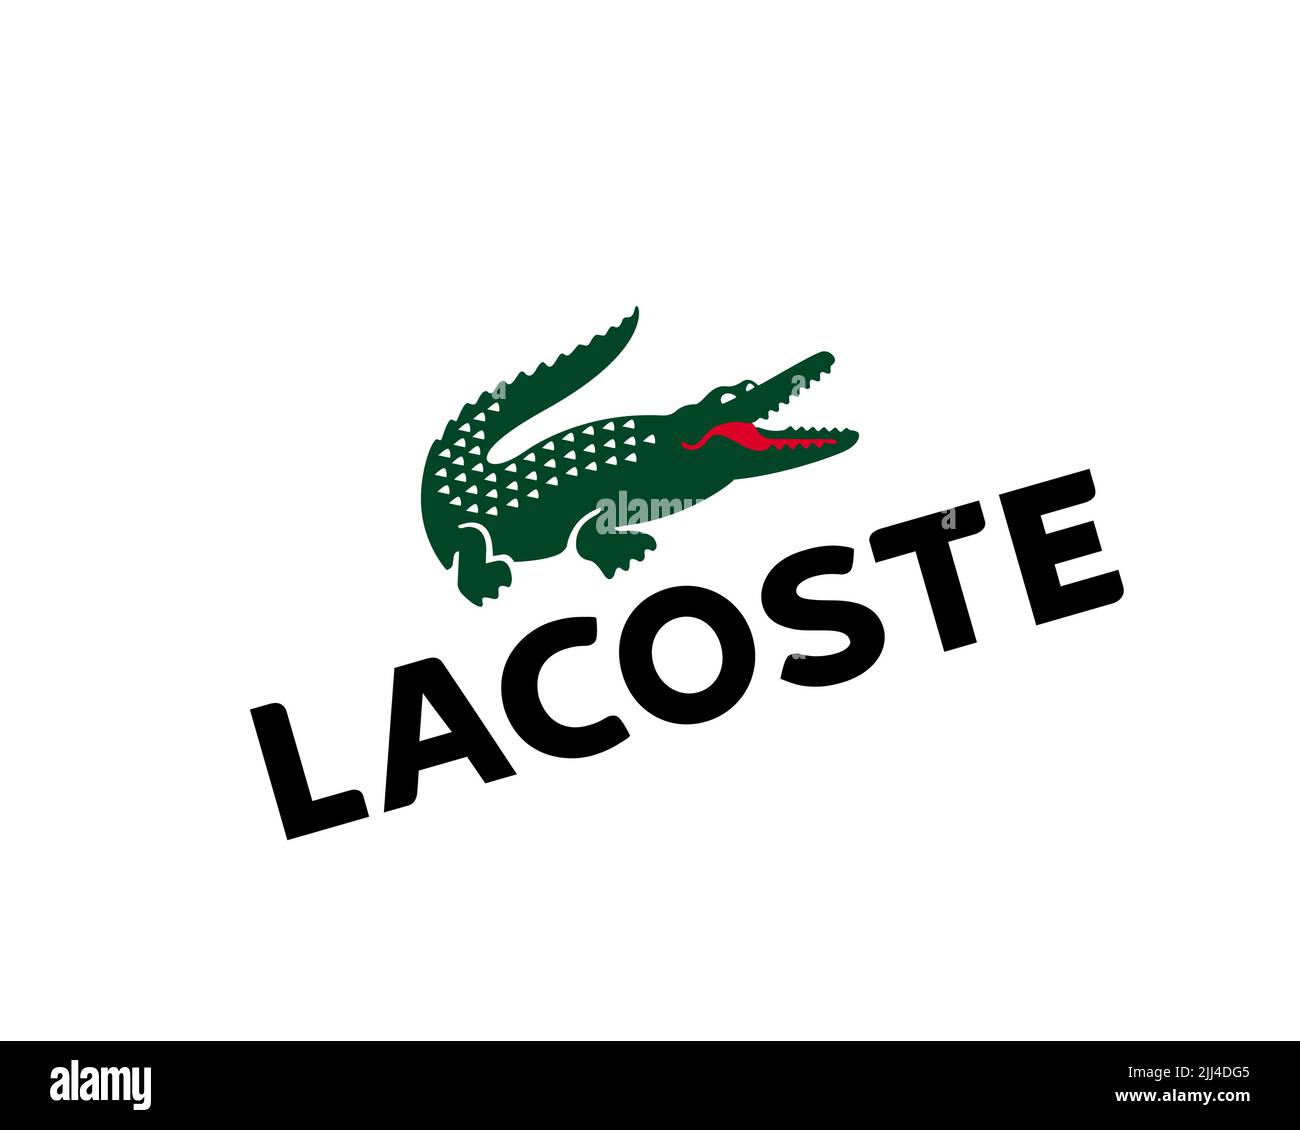 Company logo lacoste Cut Out Stock Images & Pictures - Alamy